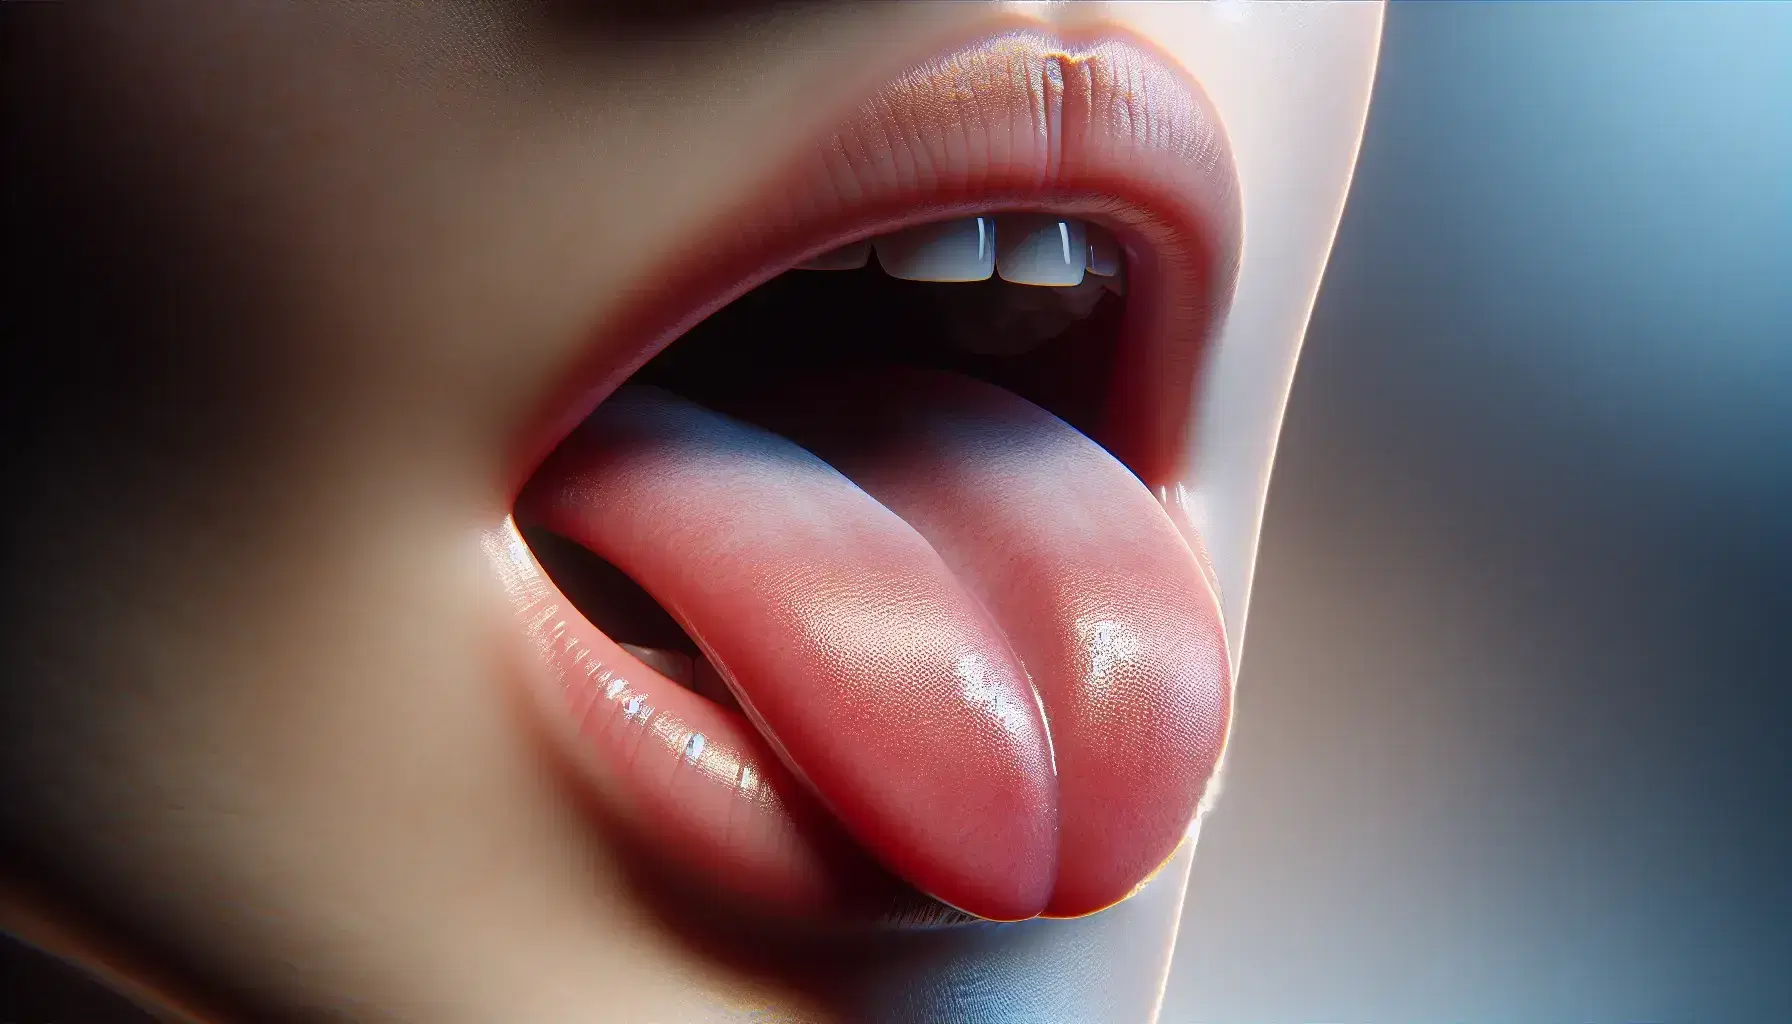 Close-up profile view of a human mouth with lips slightly parted and tongue raised, set against a blurred blue background, highlighting the articulation process.